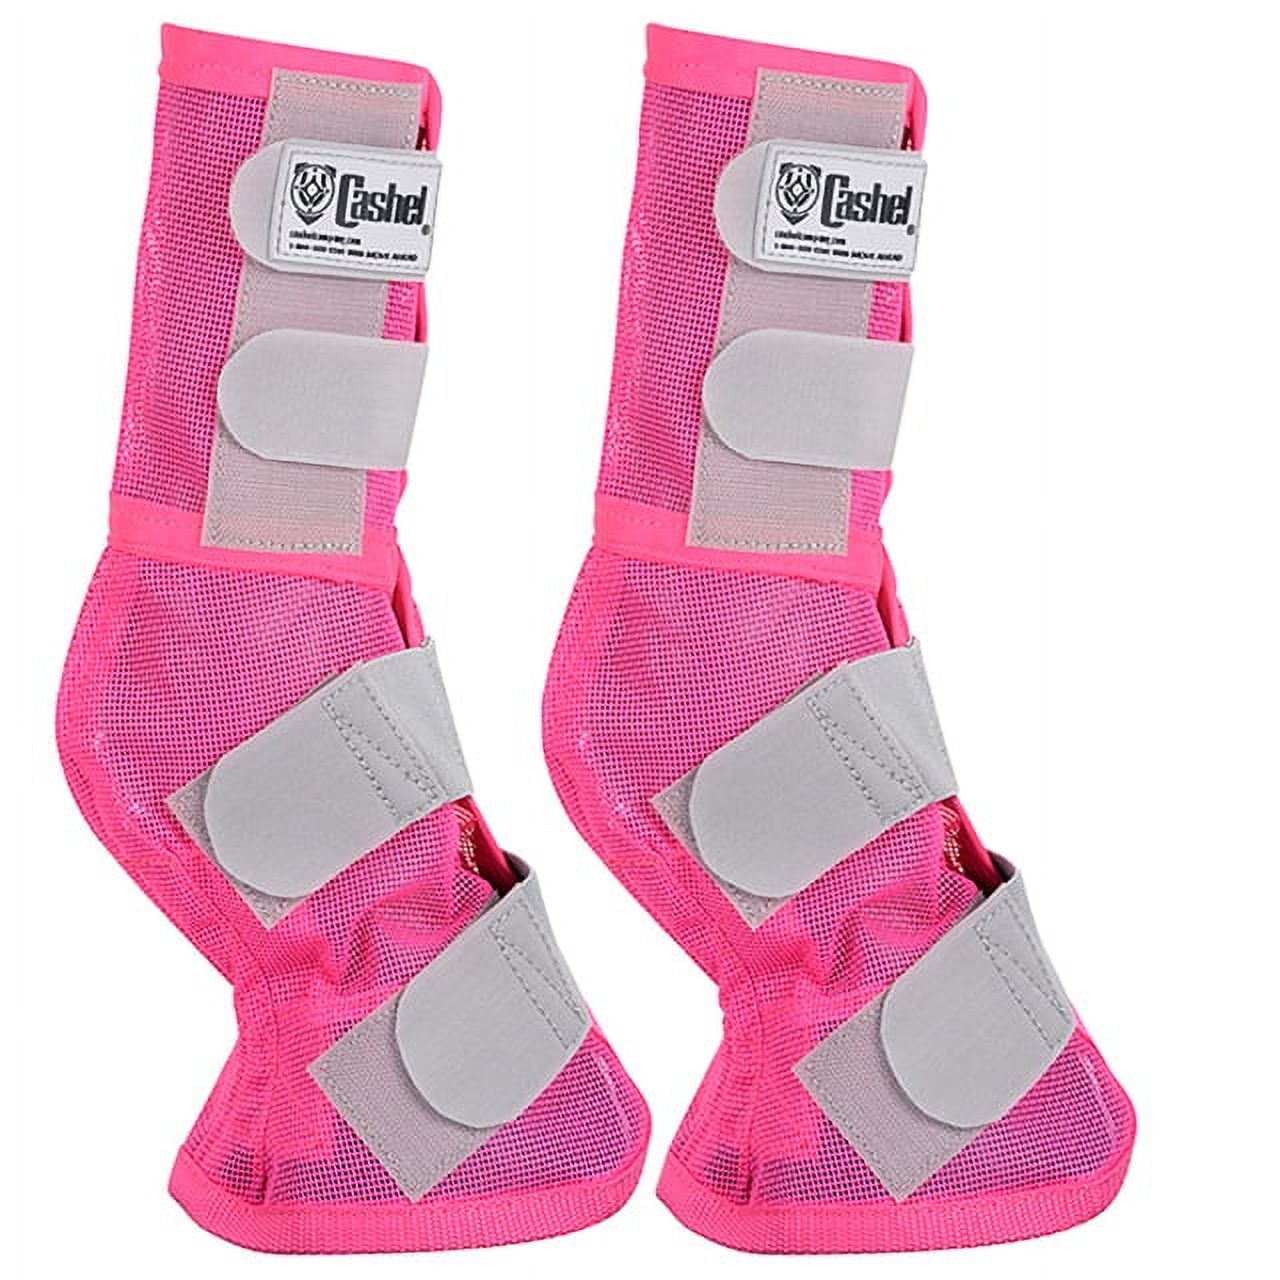 4 Pack Cashel Fly Prevention Arab Horse Leg Guard Cool Mesh Boots Pink ...